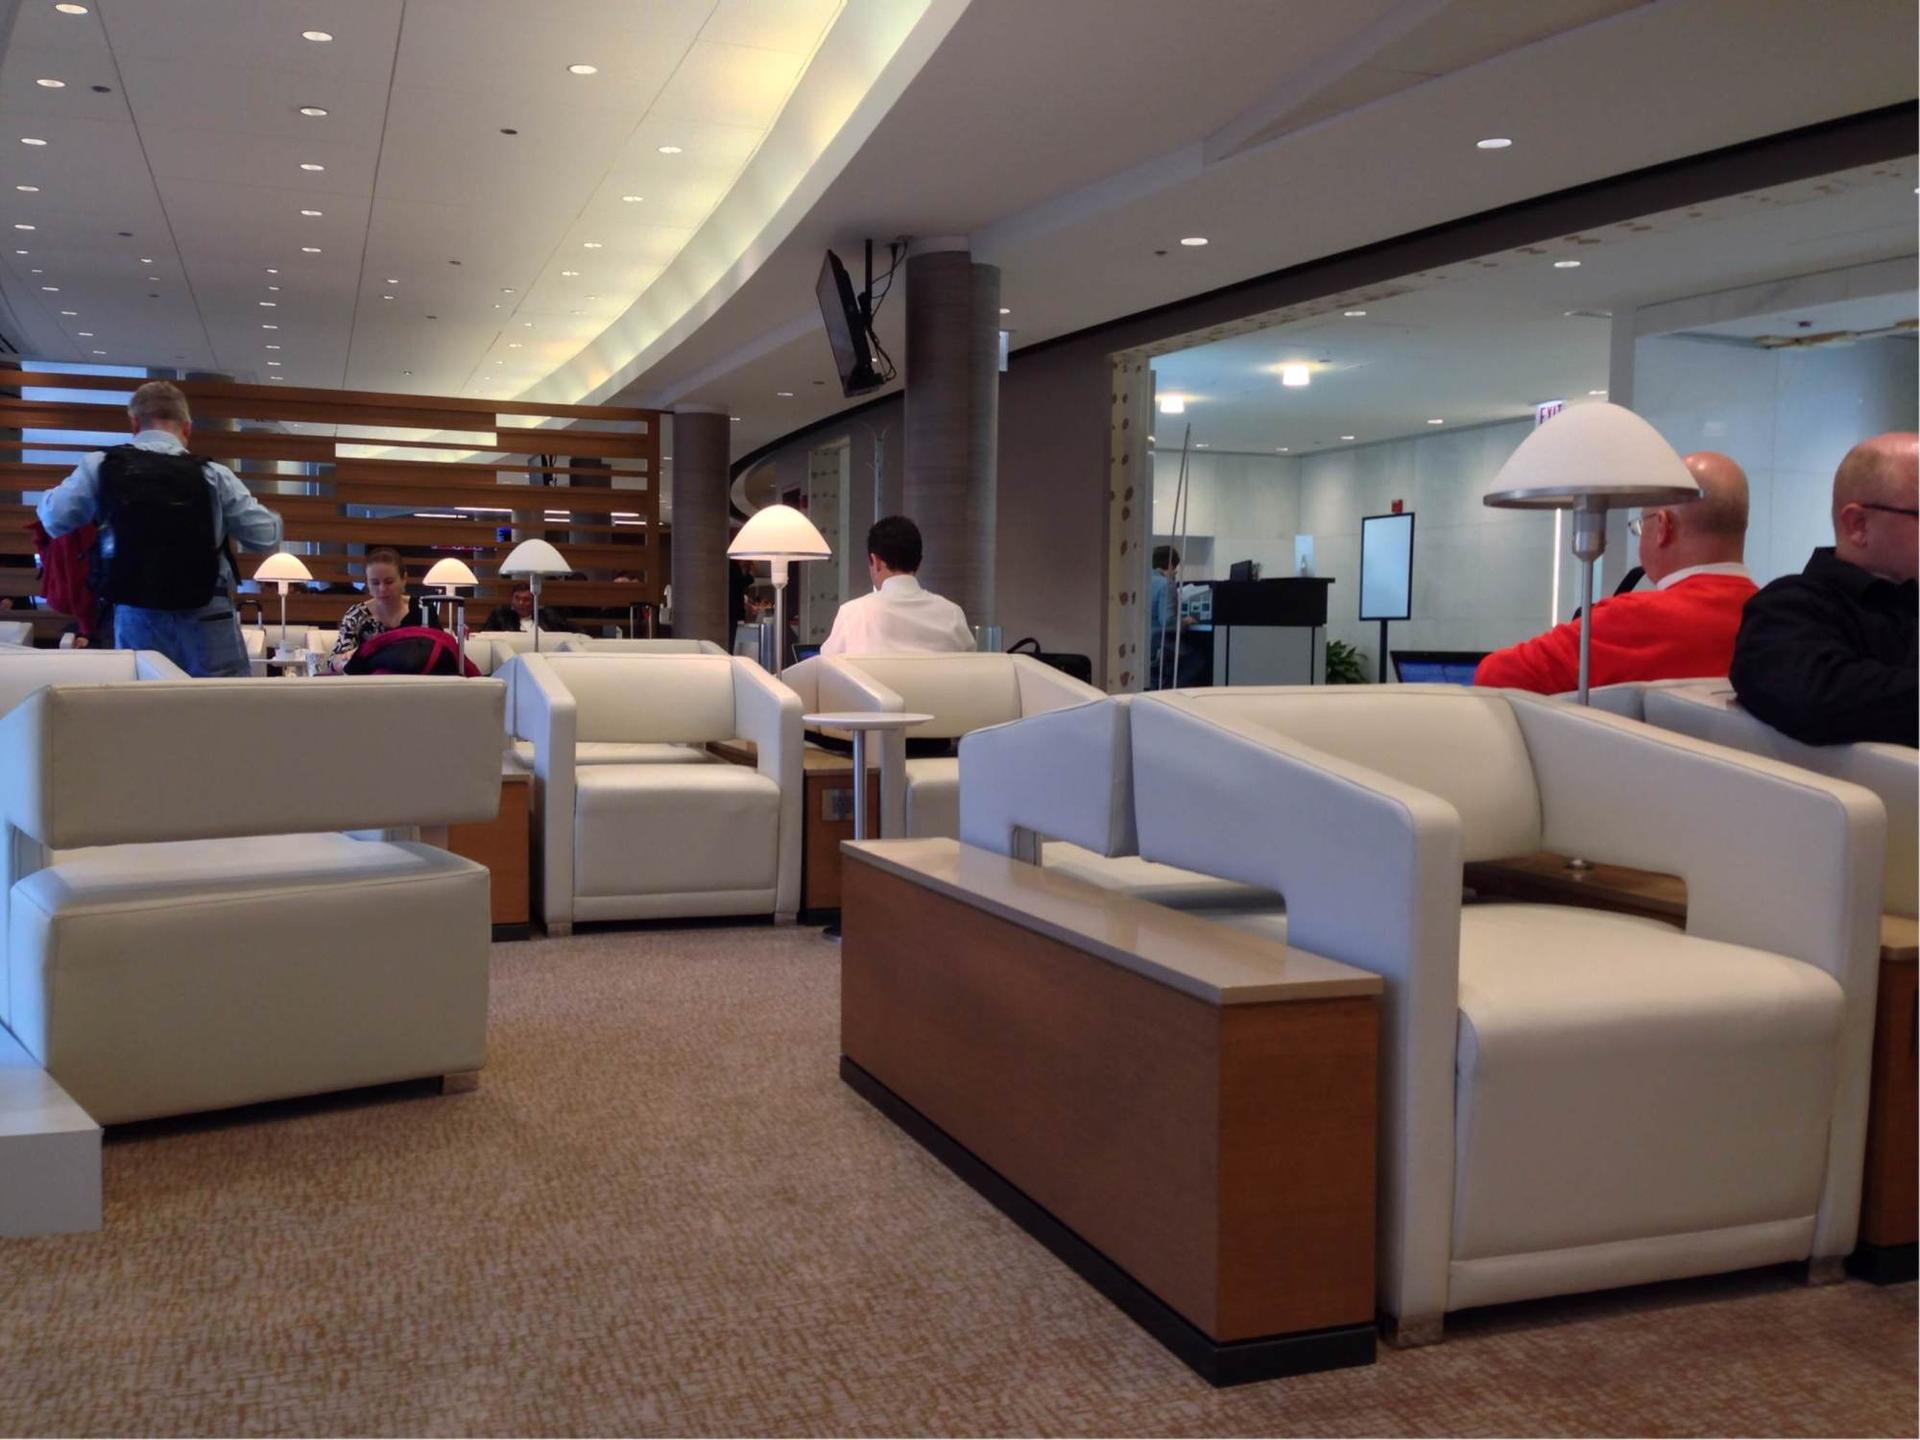 American Airlines Admirals Club image 6 of 50